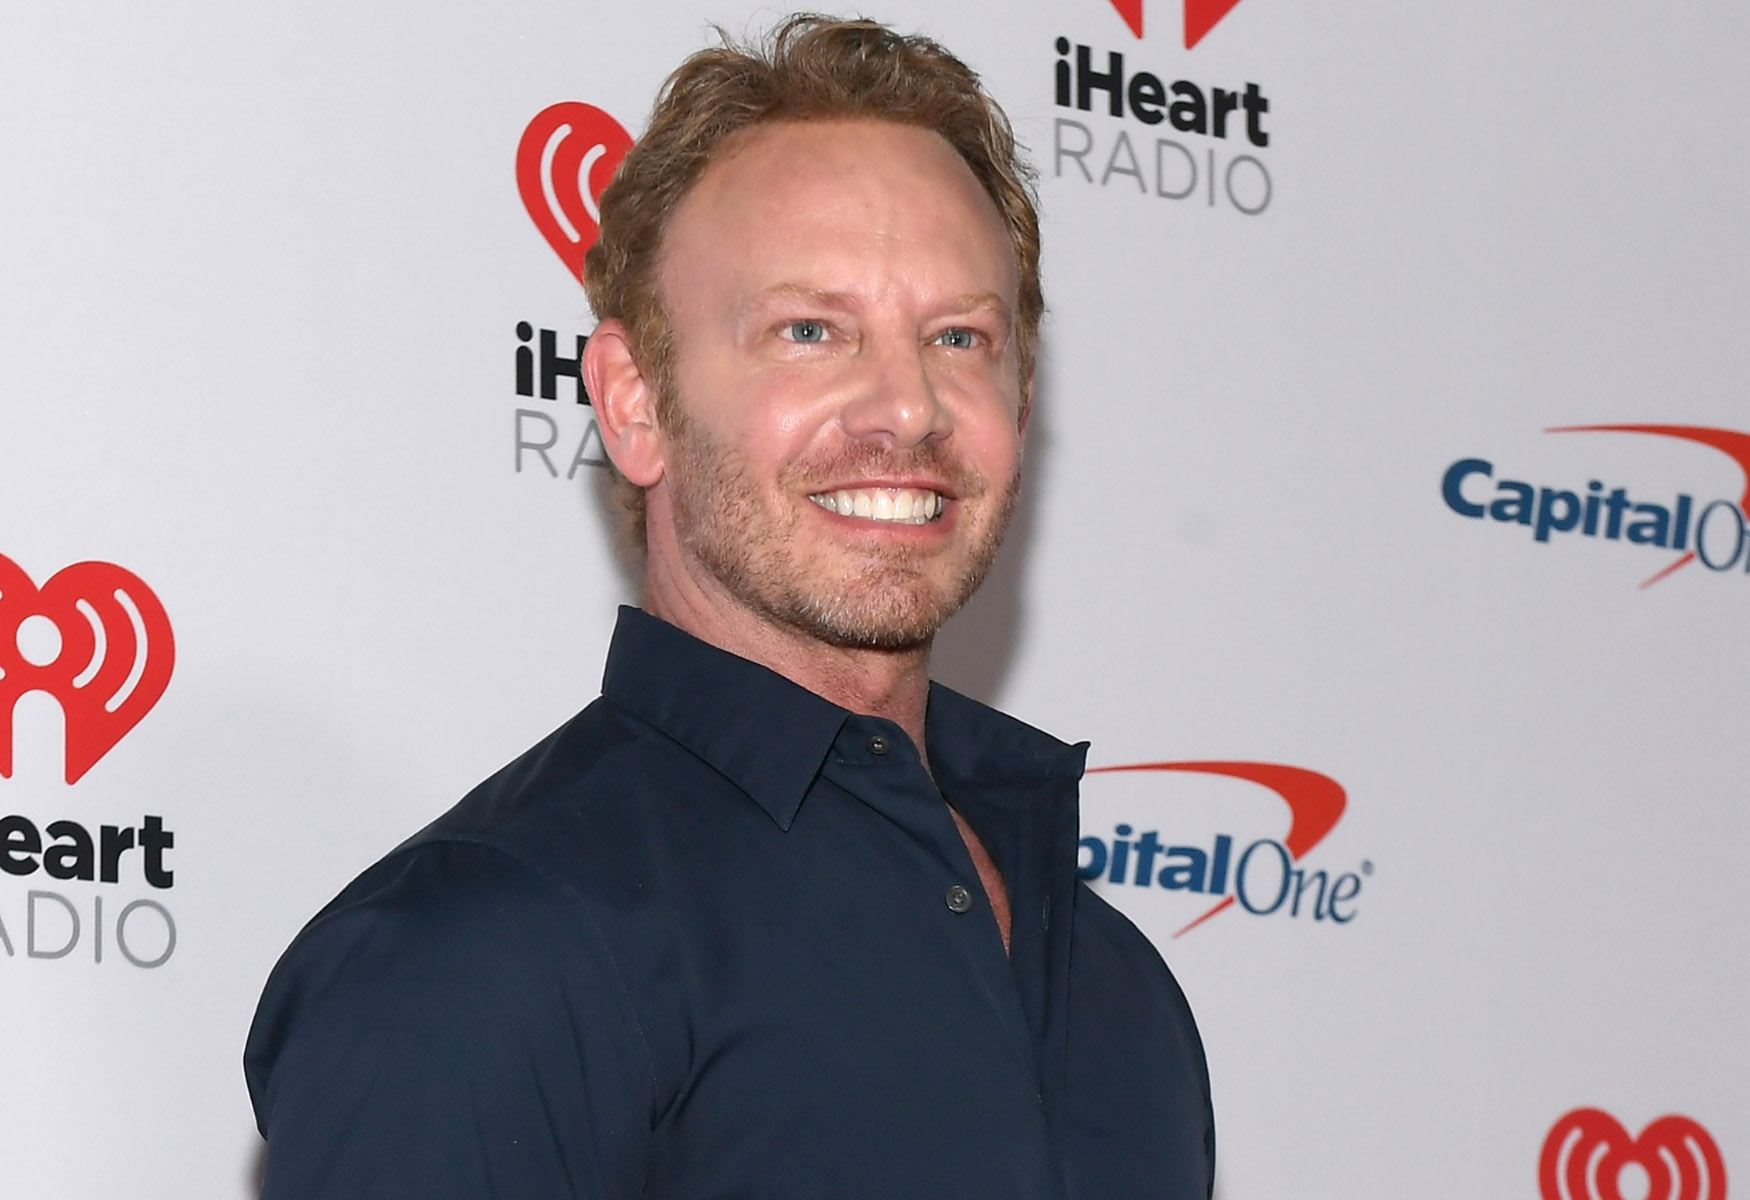 Ian Ziering’s Heroic Act: Comforting His Daughter After Hollywood Attack